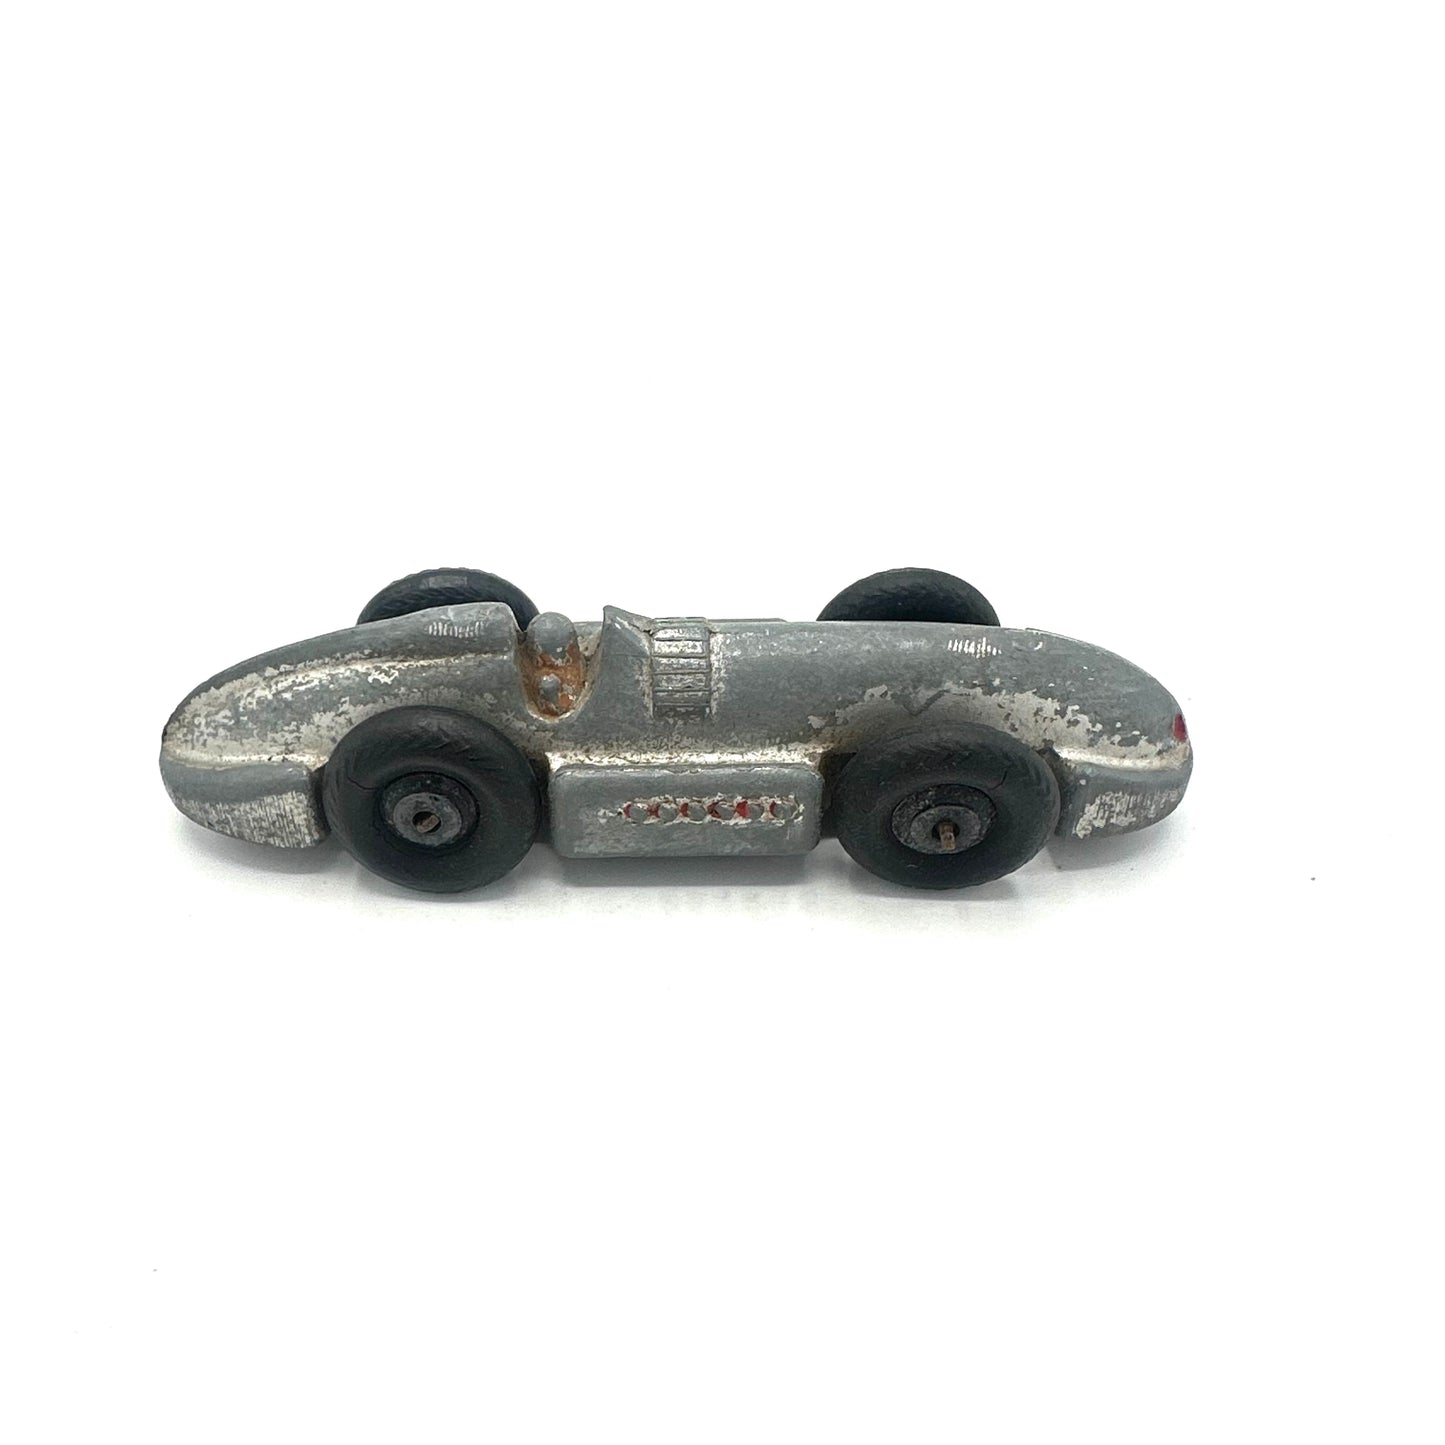 Vintage 1950's Dinky 23E Original 'Speed of the Wind' Racing Car Push Pull Model Toy